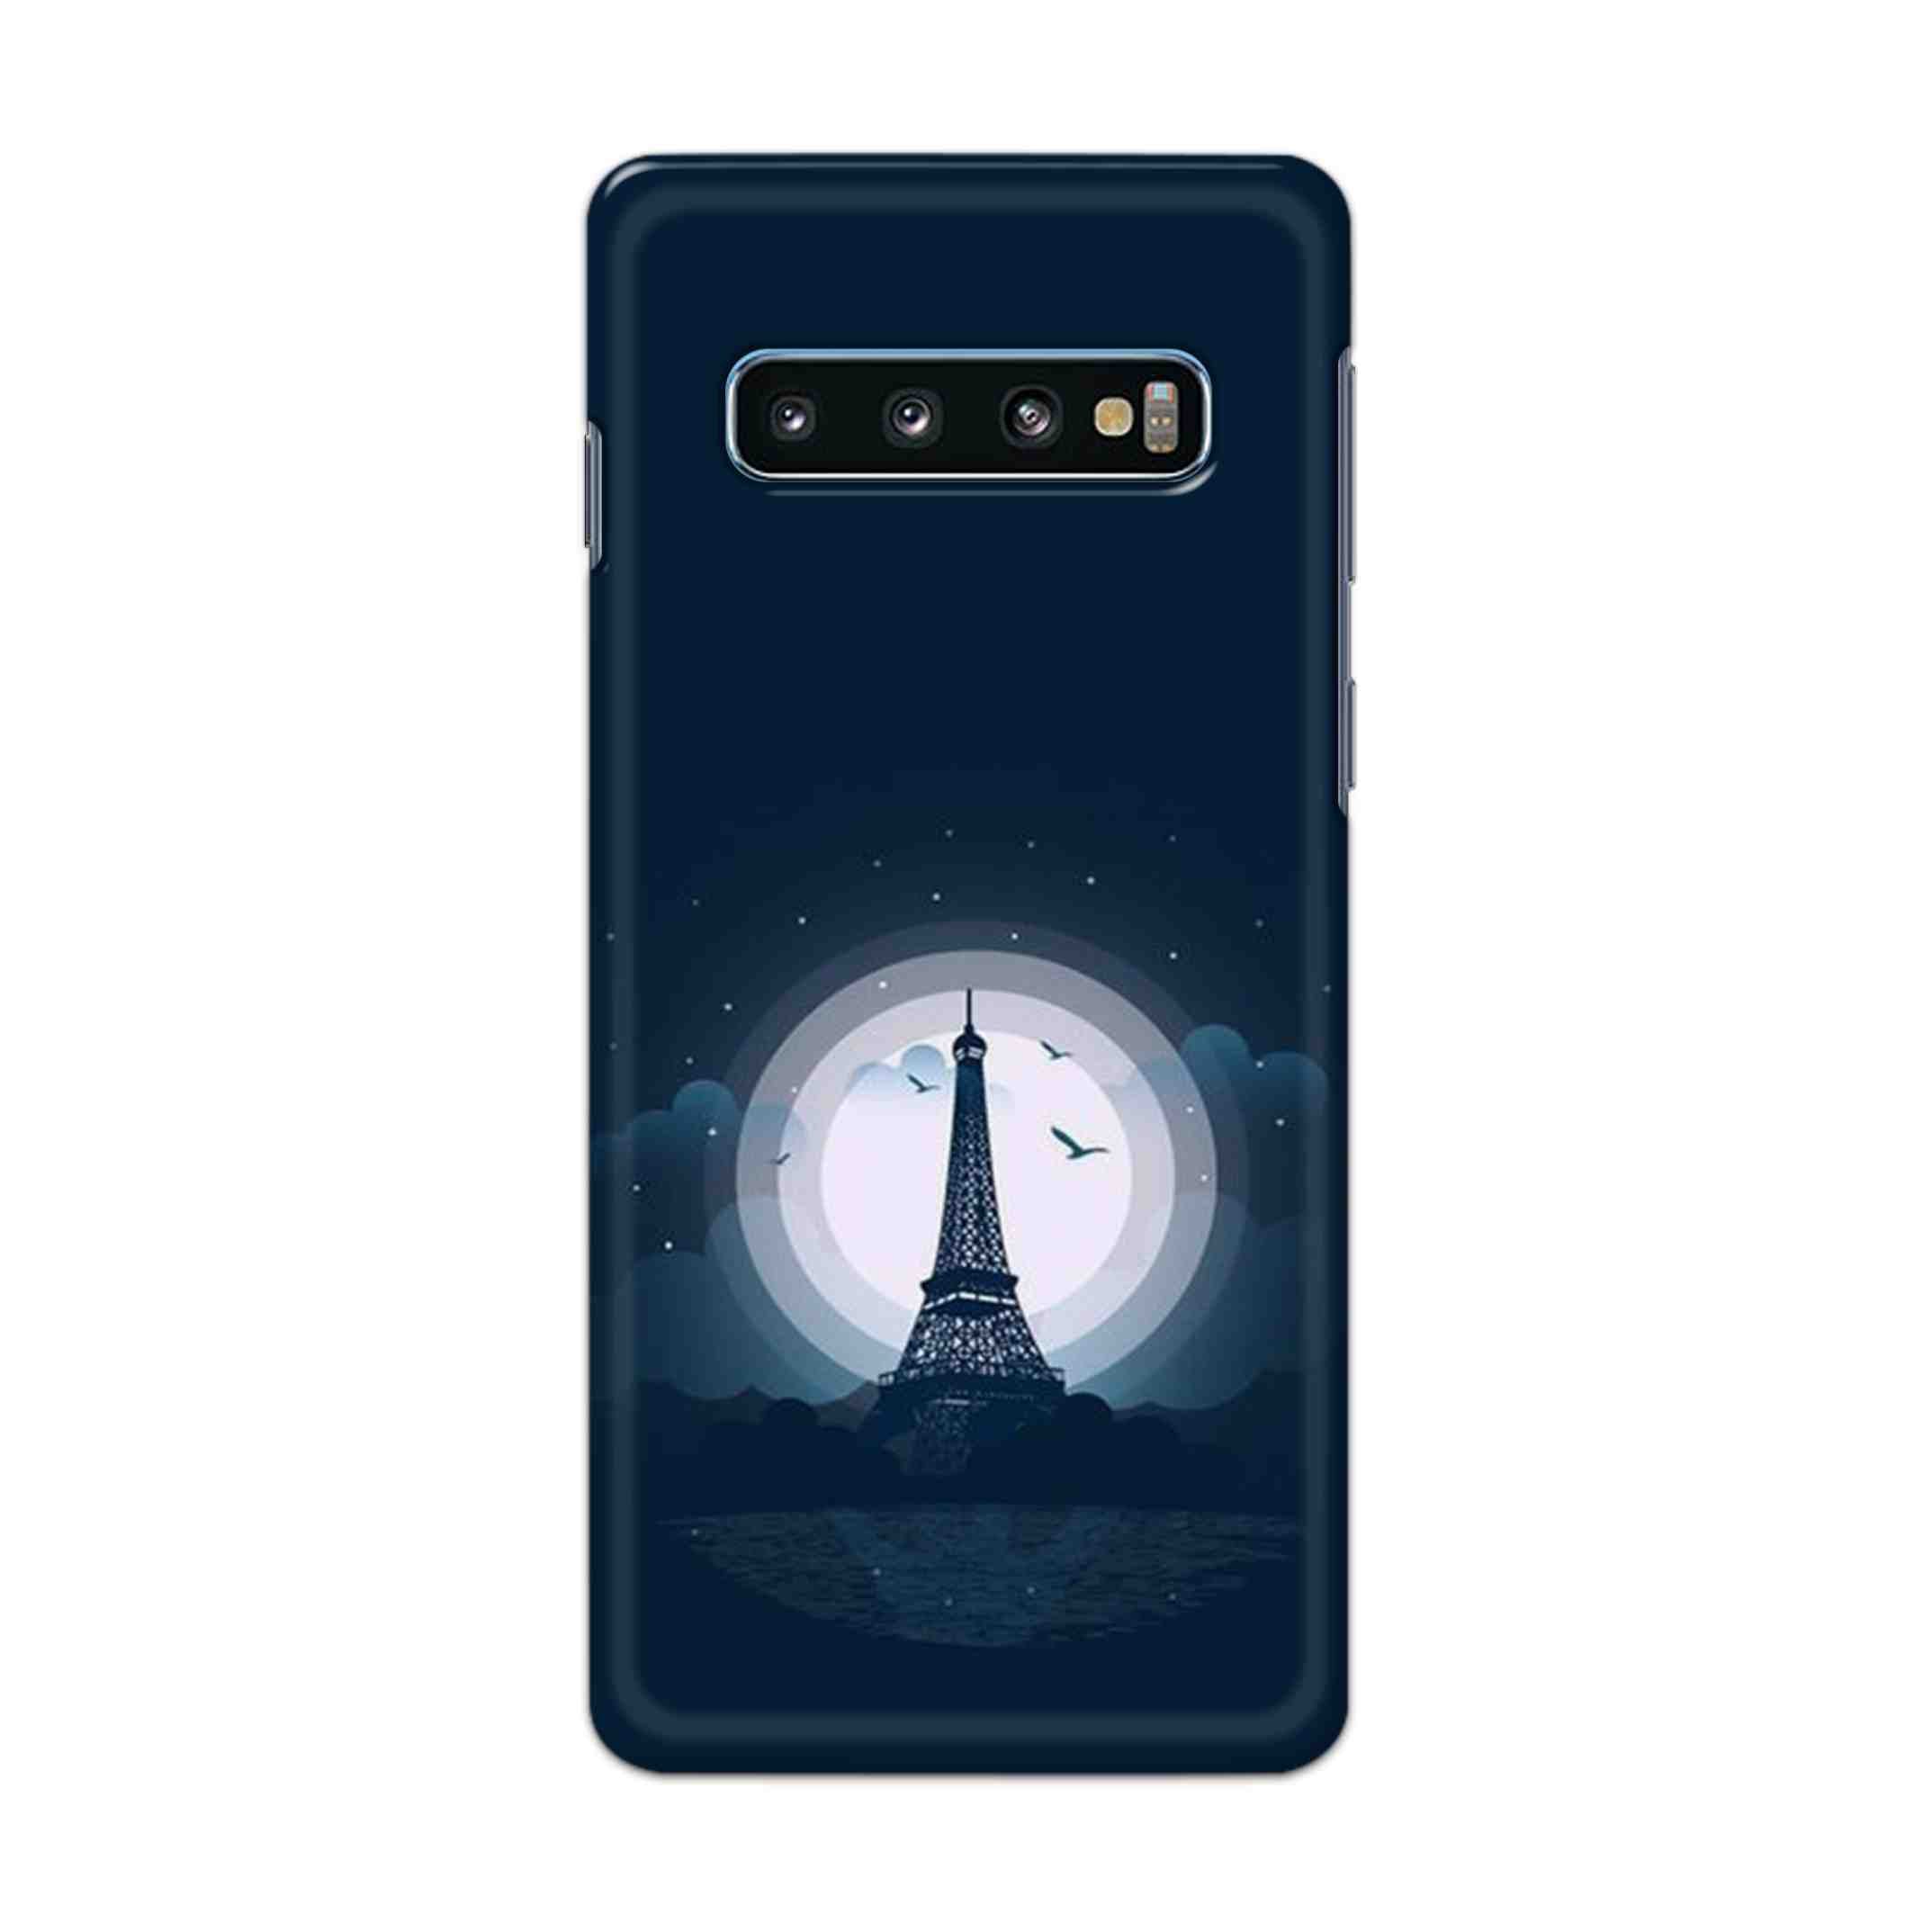 Buy Paris Eiffel Tower Hard Back Mobile Phone Case Cover For Samsung Galaxy S10 Plus Online